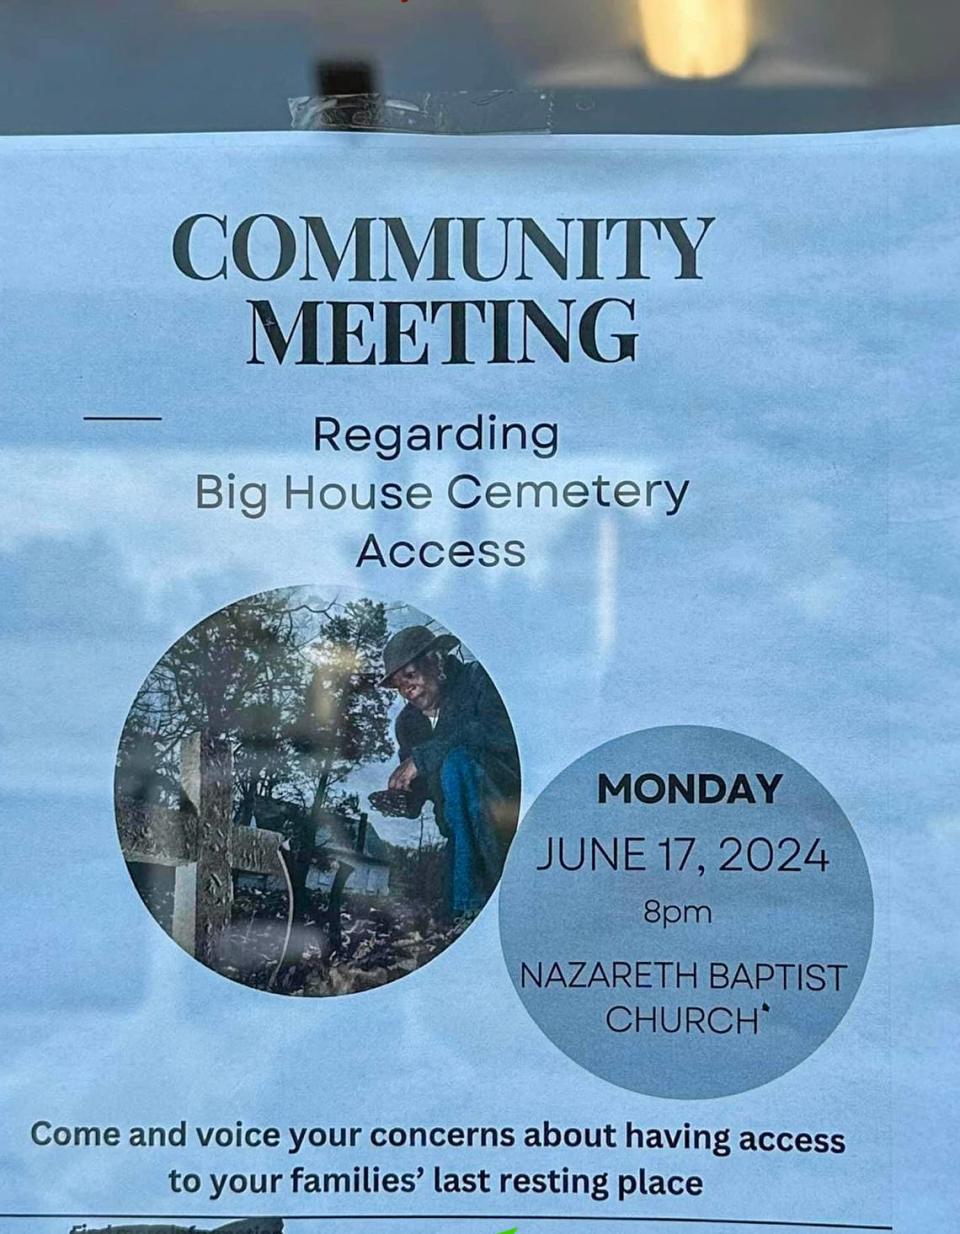 While Nazareth Baptist Church has no affiliation with Big House Cemetery, this handout photo was posted at a store in the St. Helena community for a community meeting regarding access to the family-plotted graveyard.